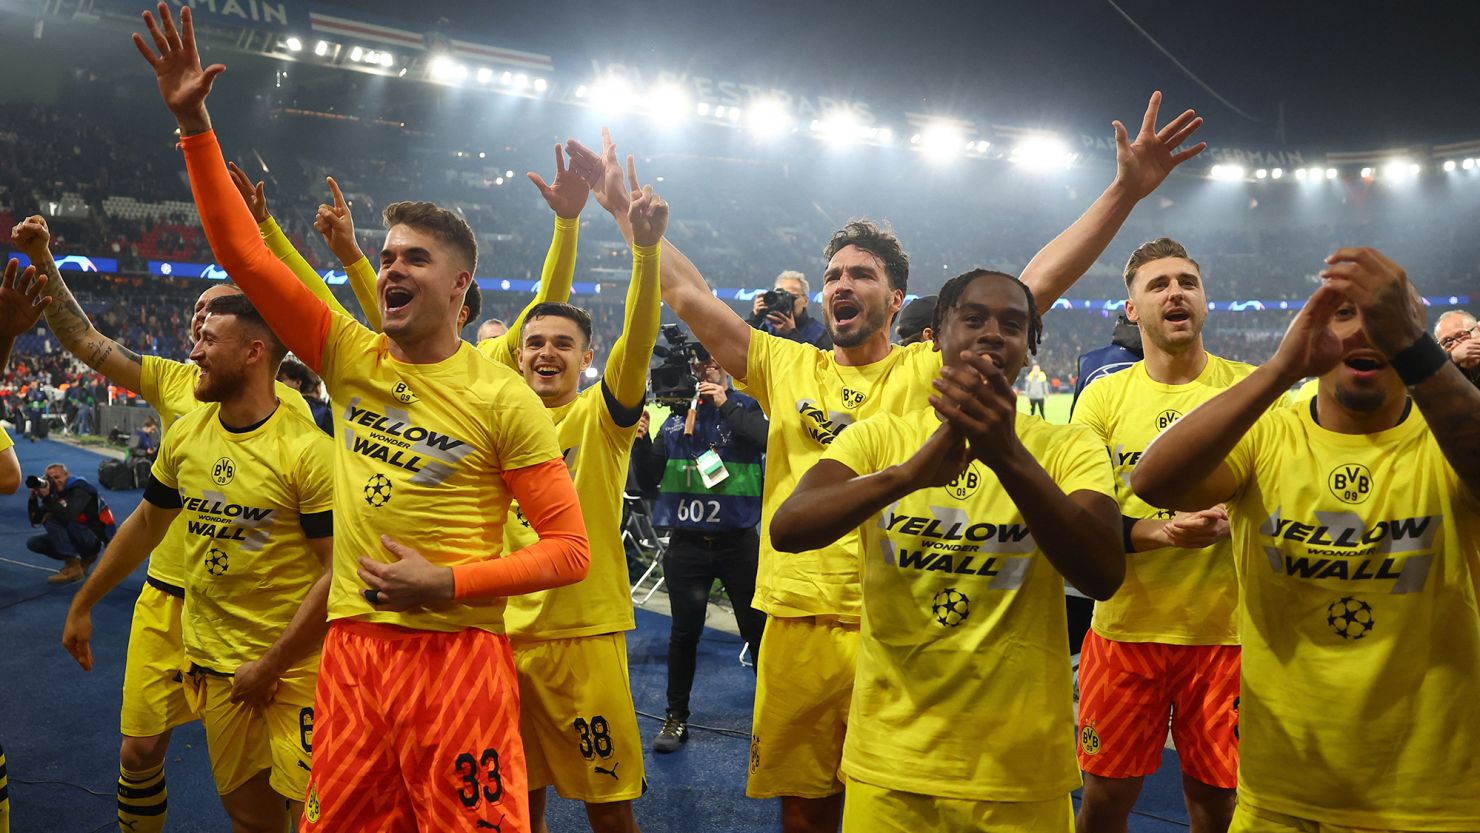 Borussia Dortmund players celebrate with fans after reaching the Champions League final.